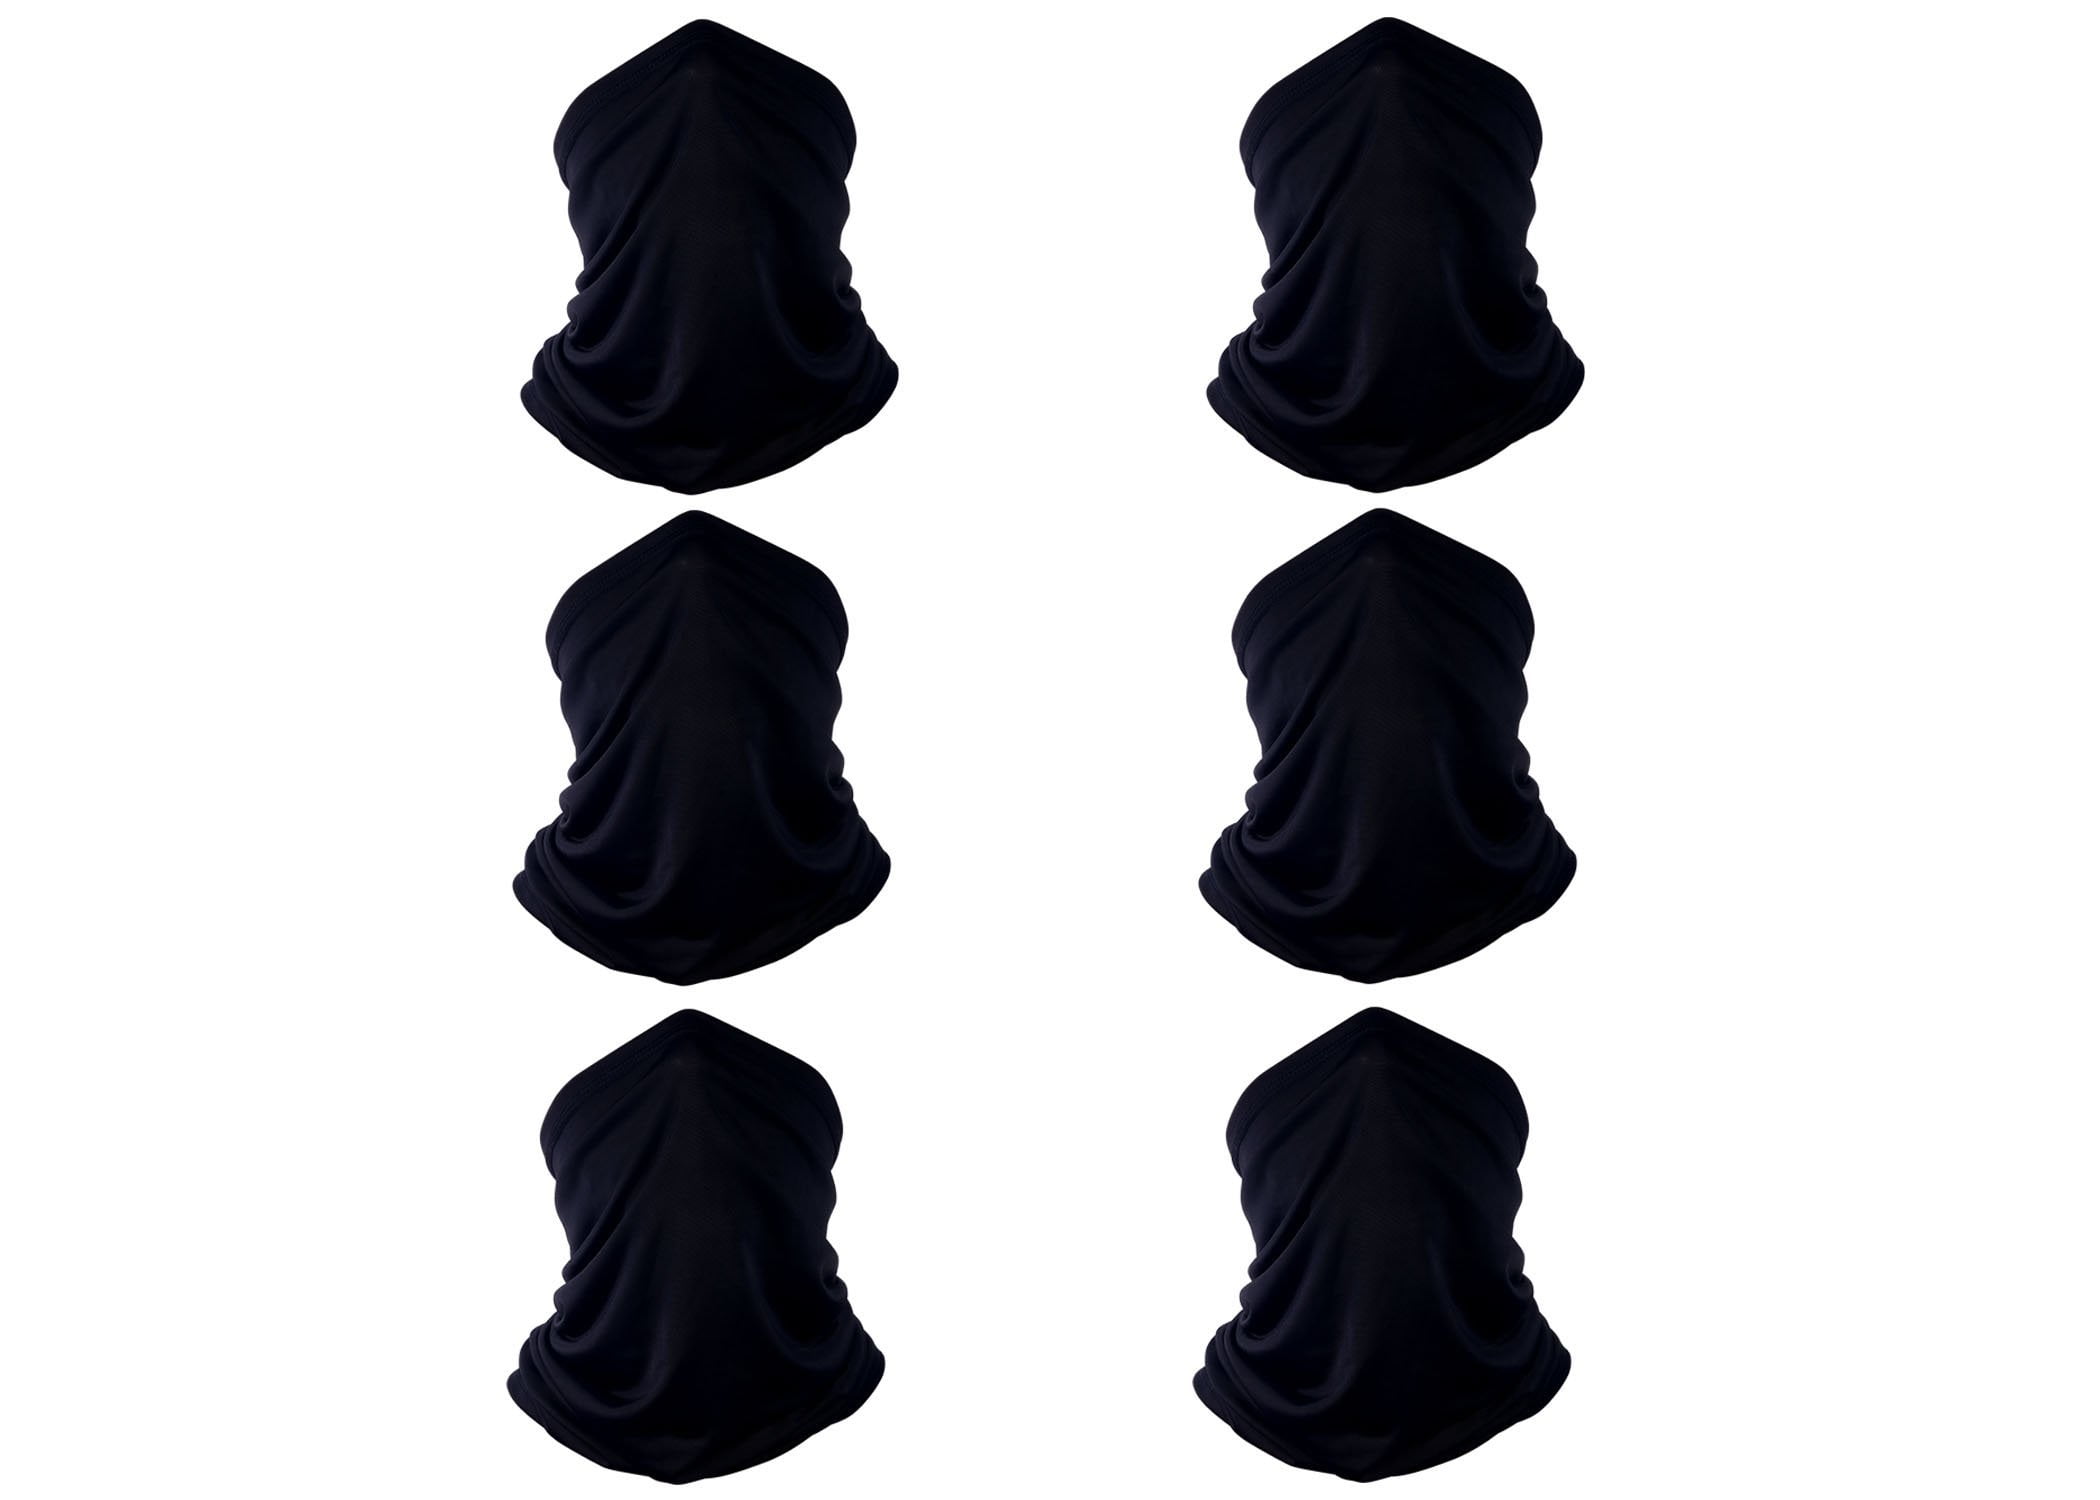 Details about    1 PACK AJ Neck Gaiter Black Face Mask Breathable Cool Sports Balaclava 